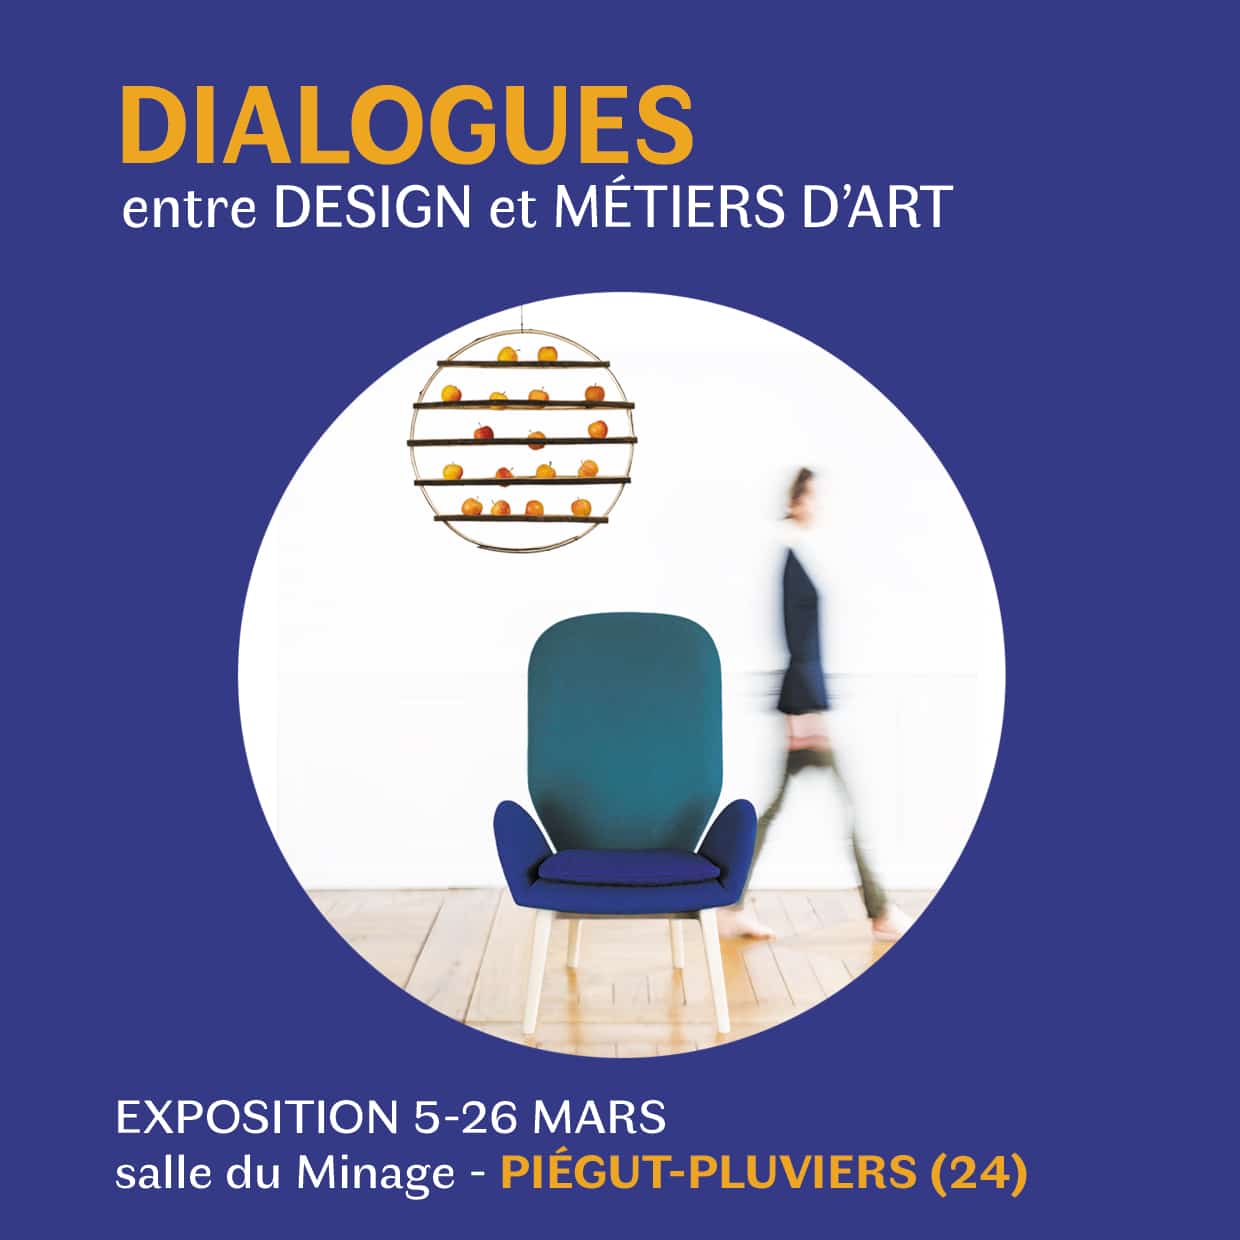 Dialogues, between design and arts and crafts – design and arts and crafts exhibition in Piégut-Pluviers